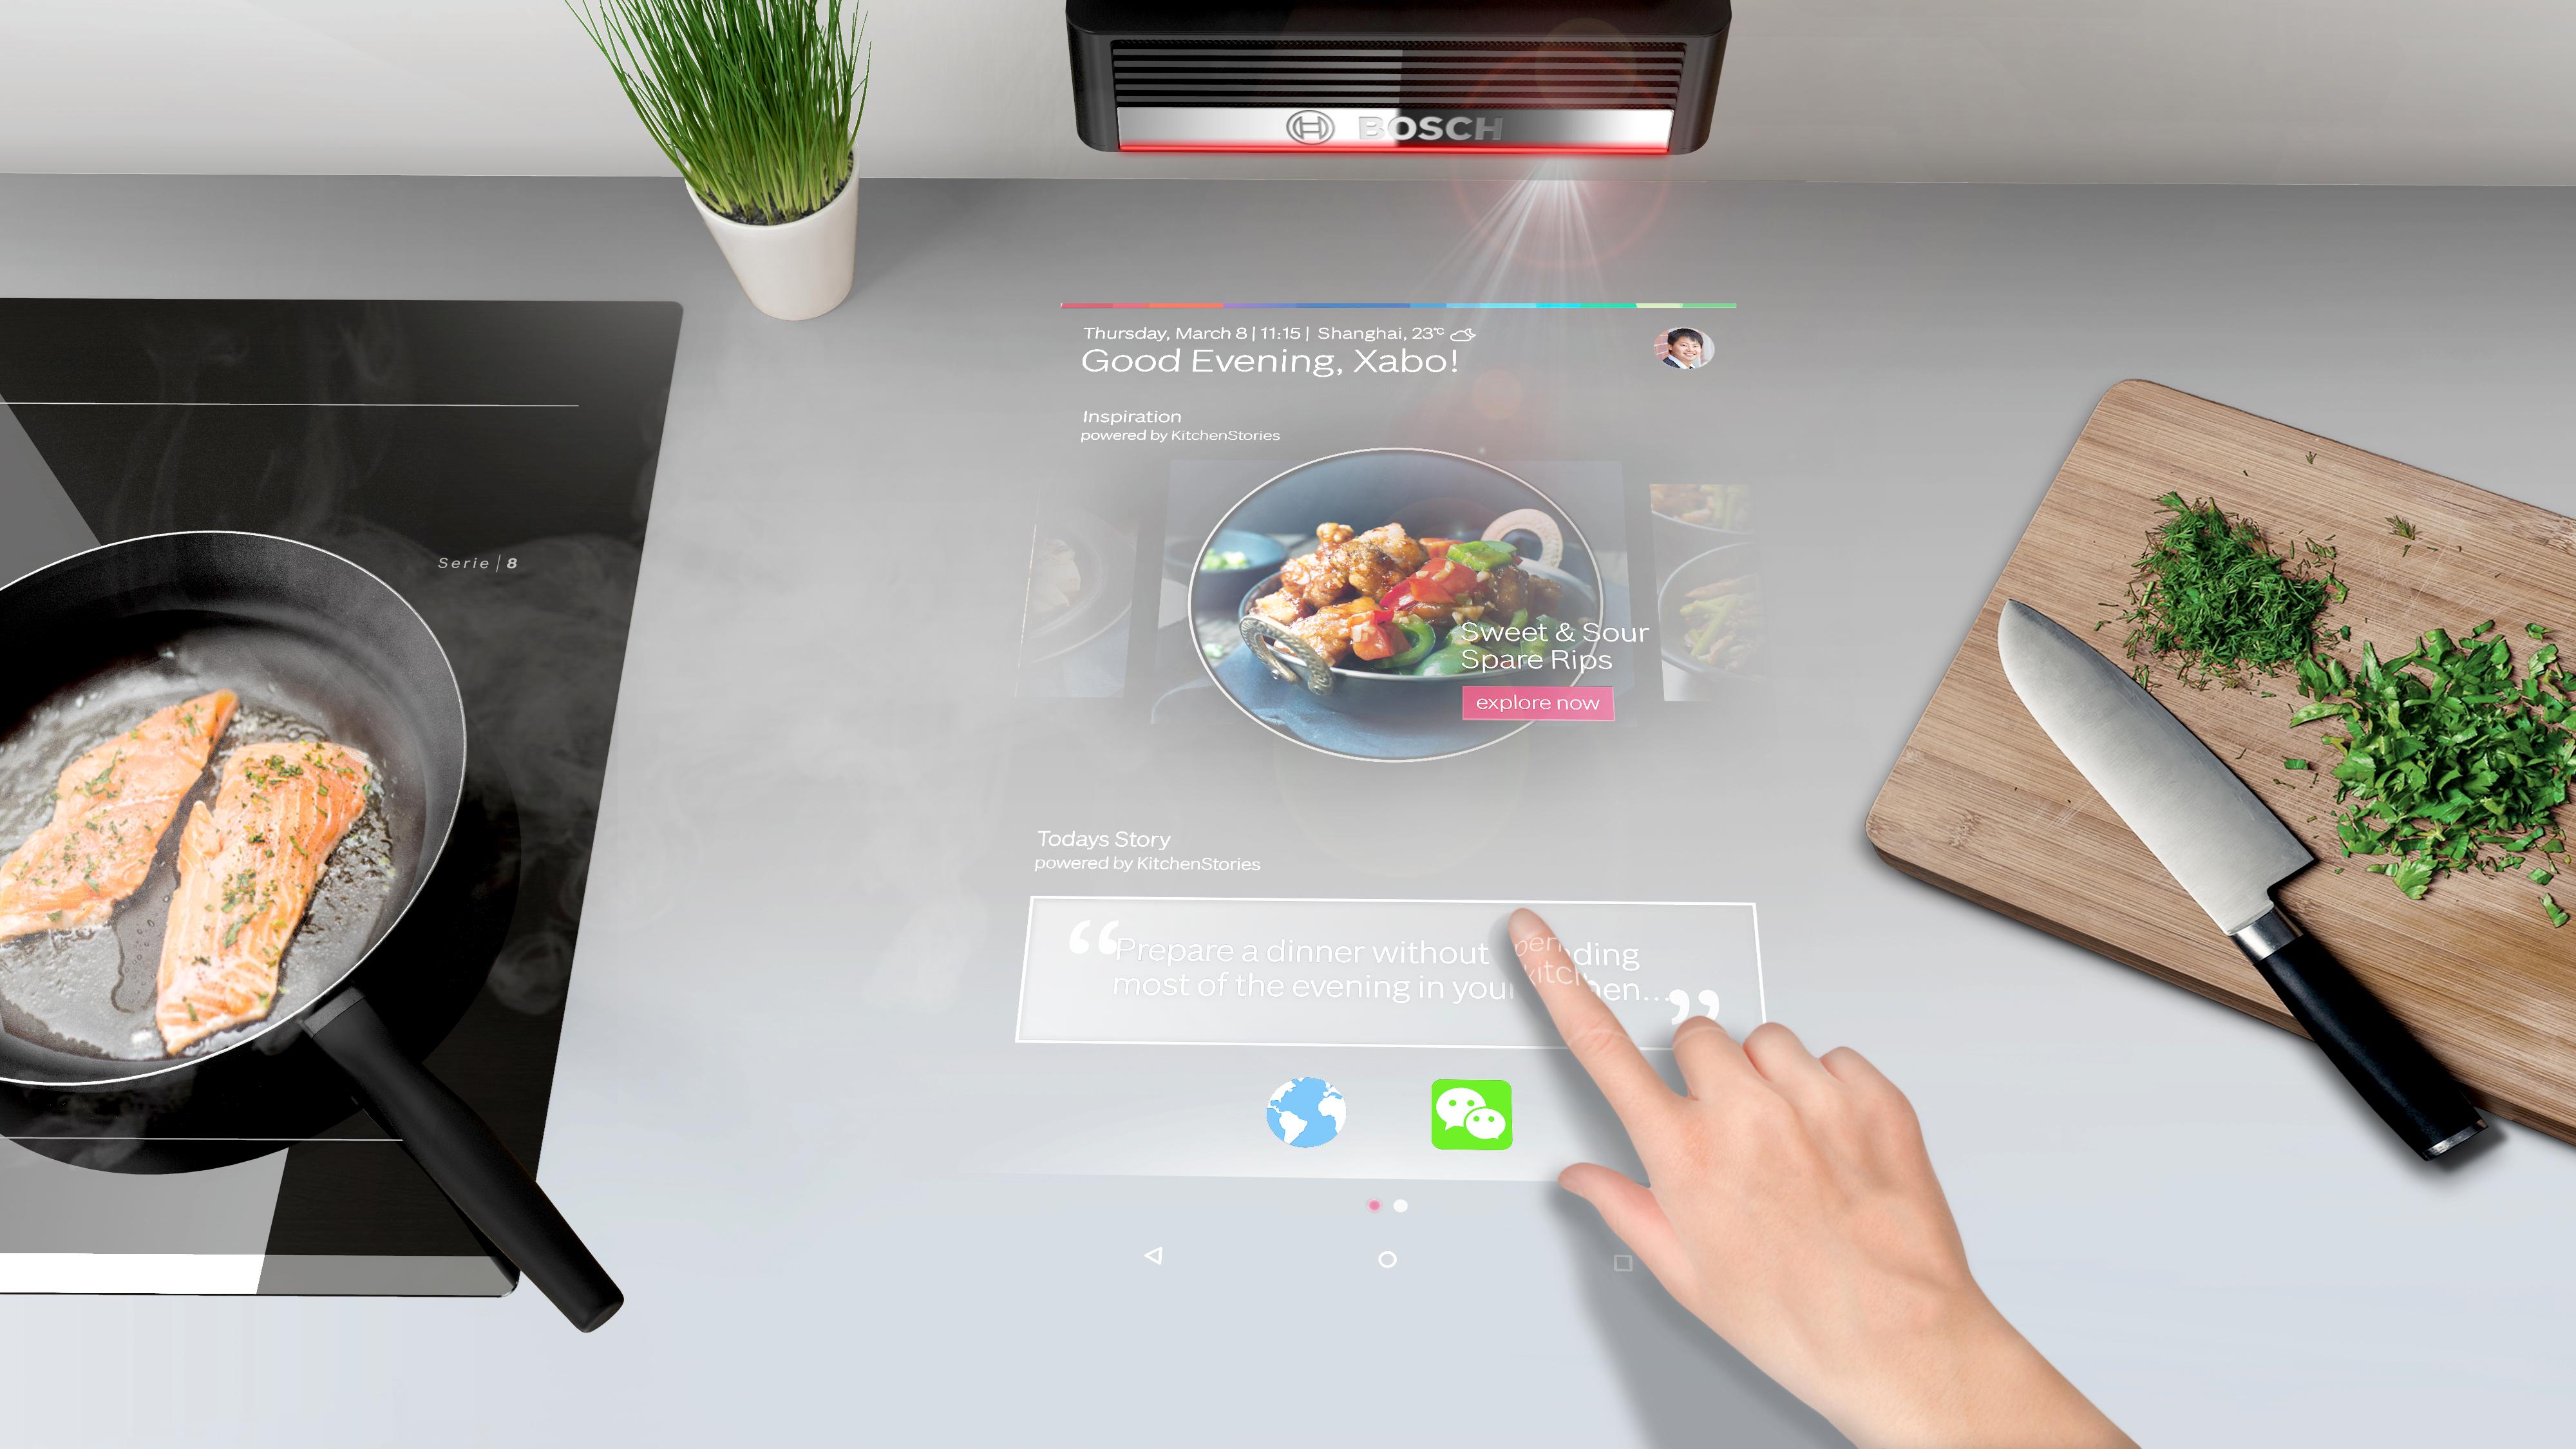 Cooking without sticky touchscreens: The PAI-Projector